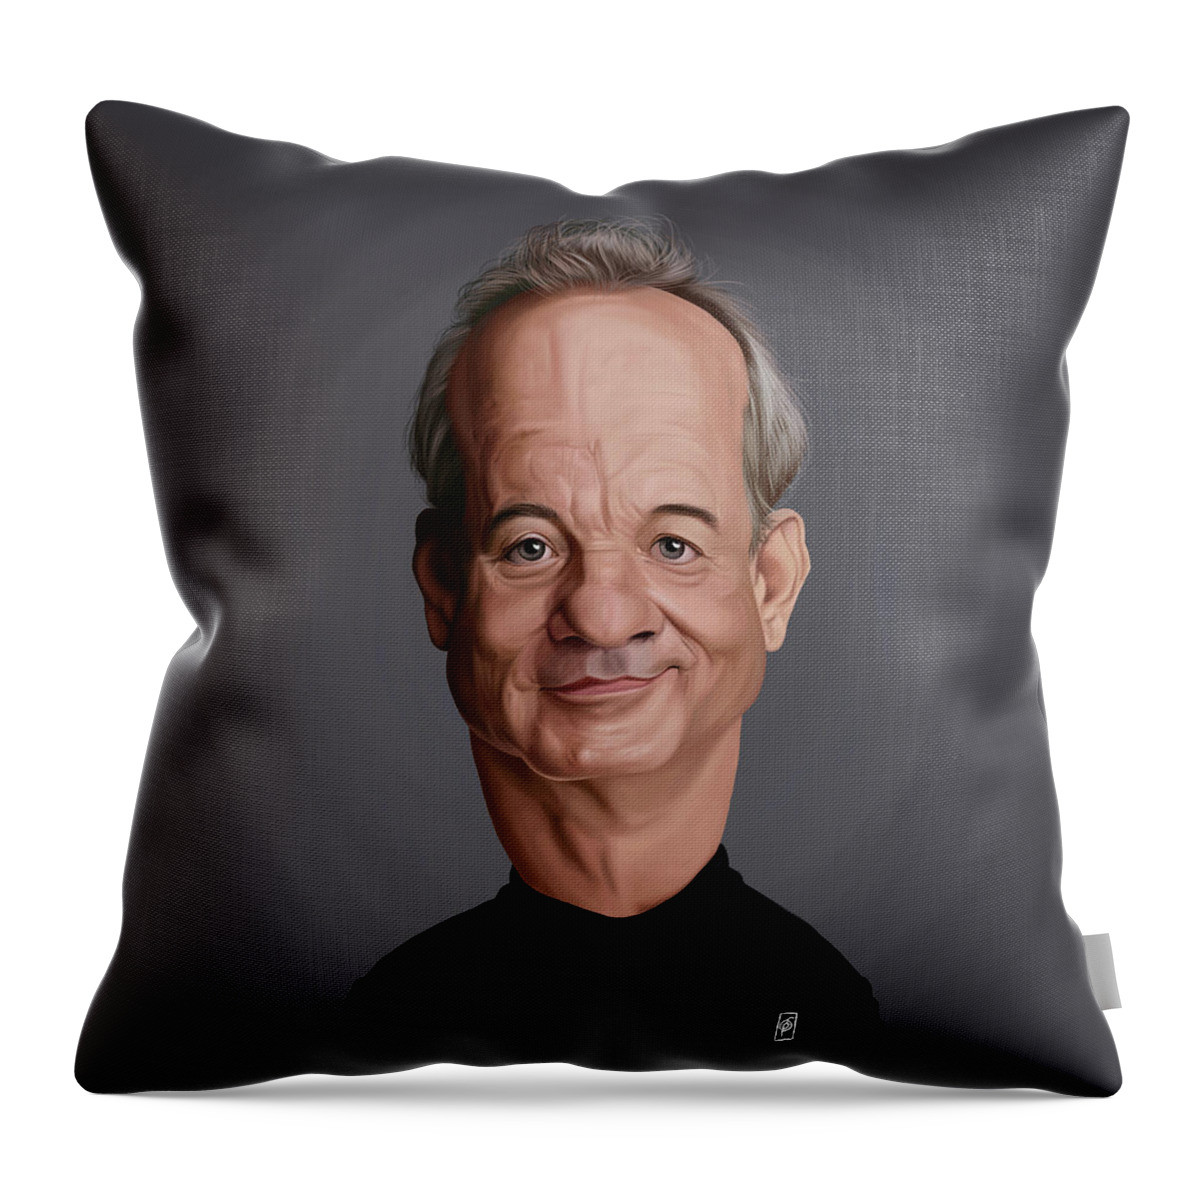 Illustration Throw Pillow featuring the digital art Celebrity Sunday - Bill Murray by Rob Snow